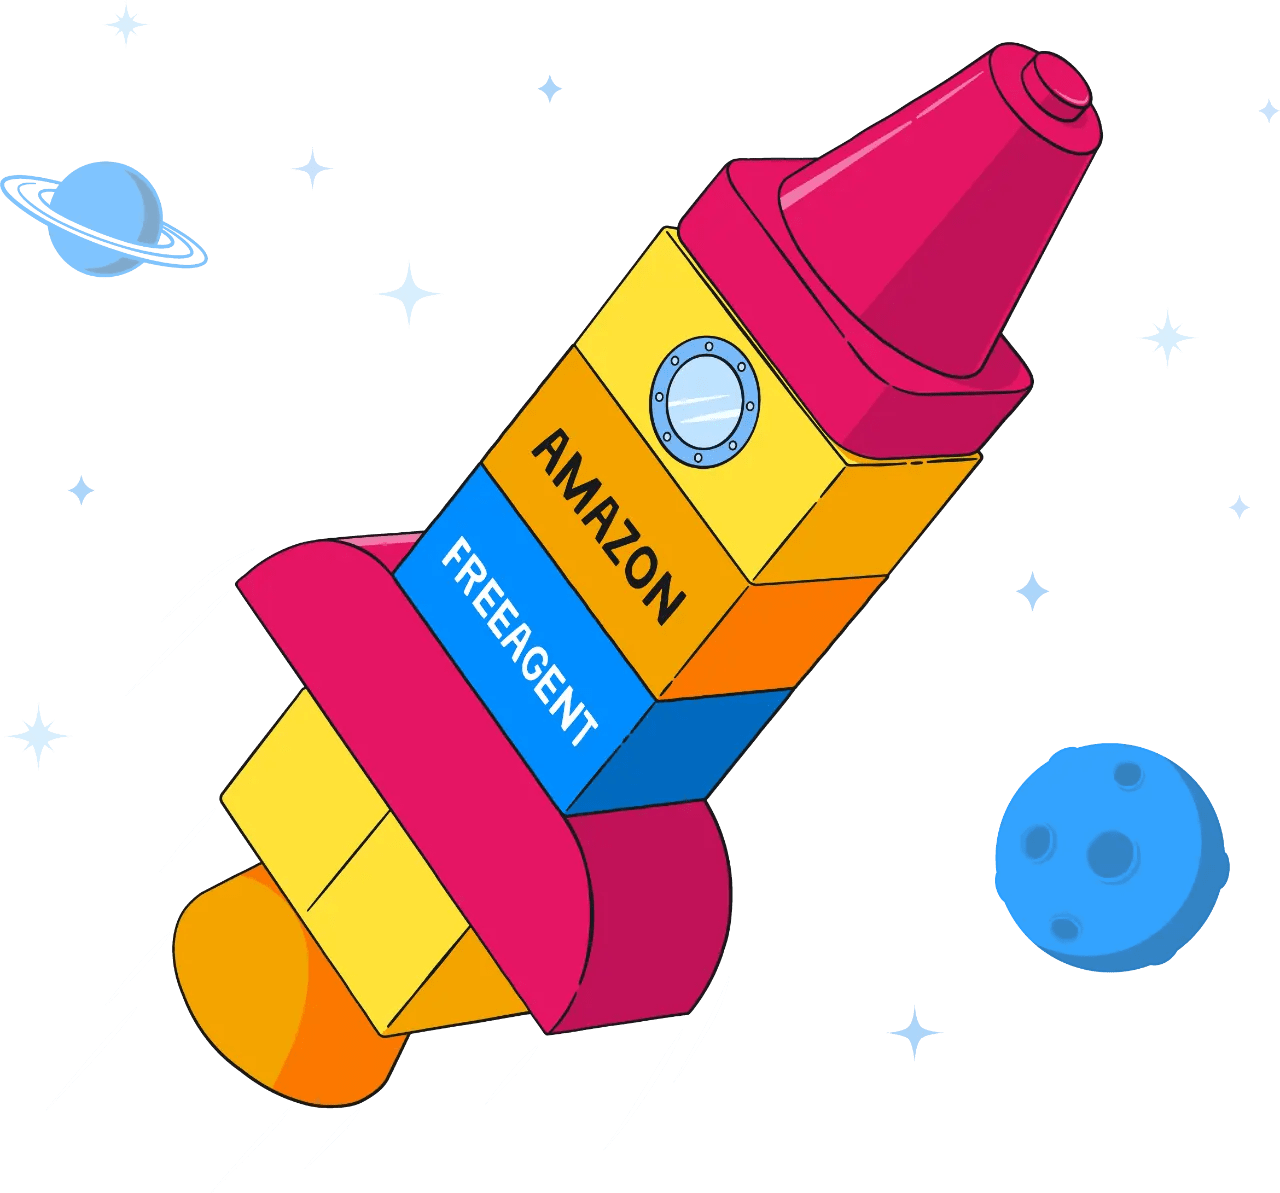 Illustration of a colourful lego rocket with 'Amazon' and 'FreeAgent' written on the side flying through space with stars and planets in the background